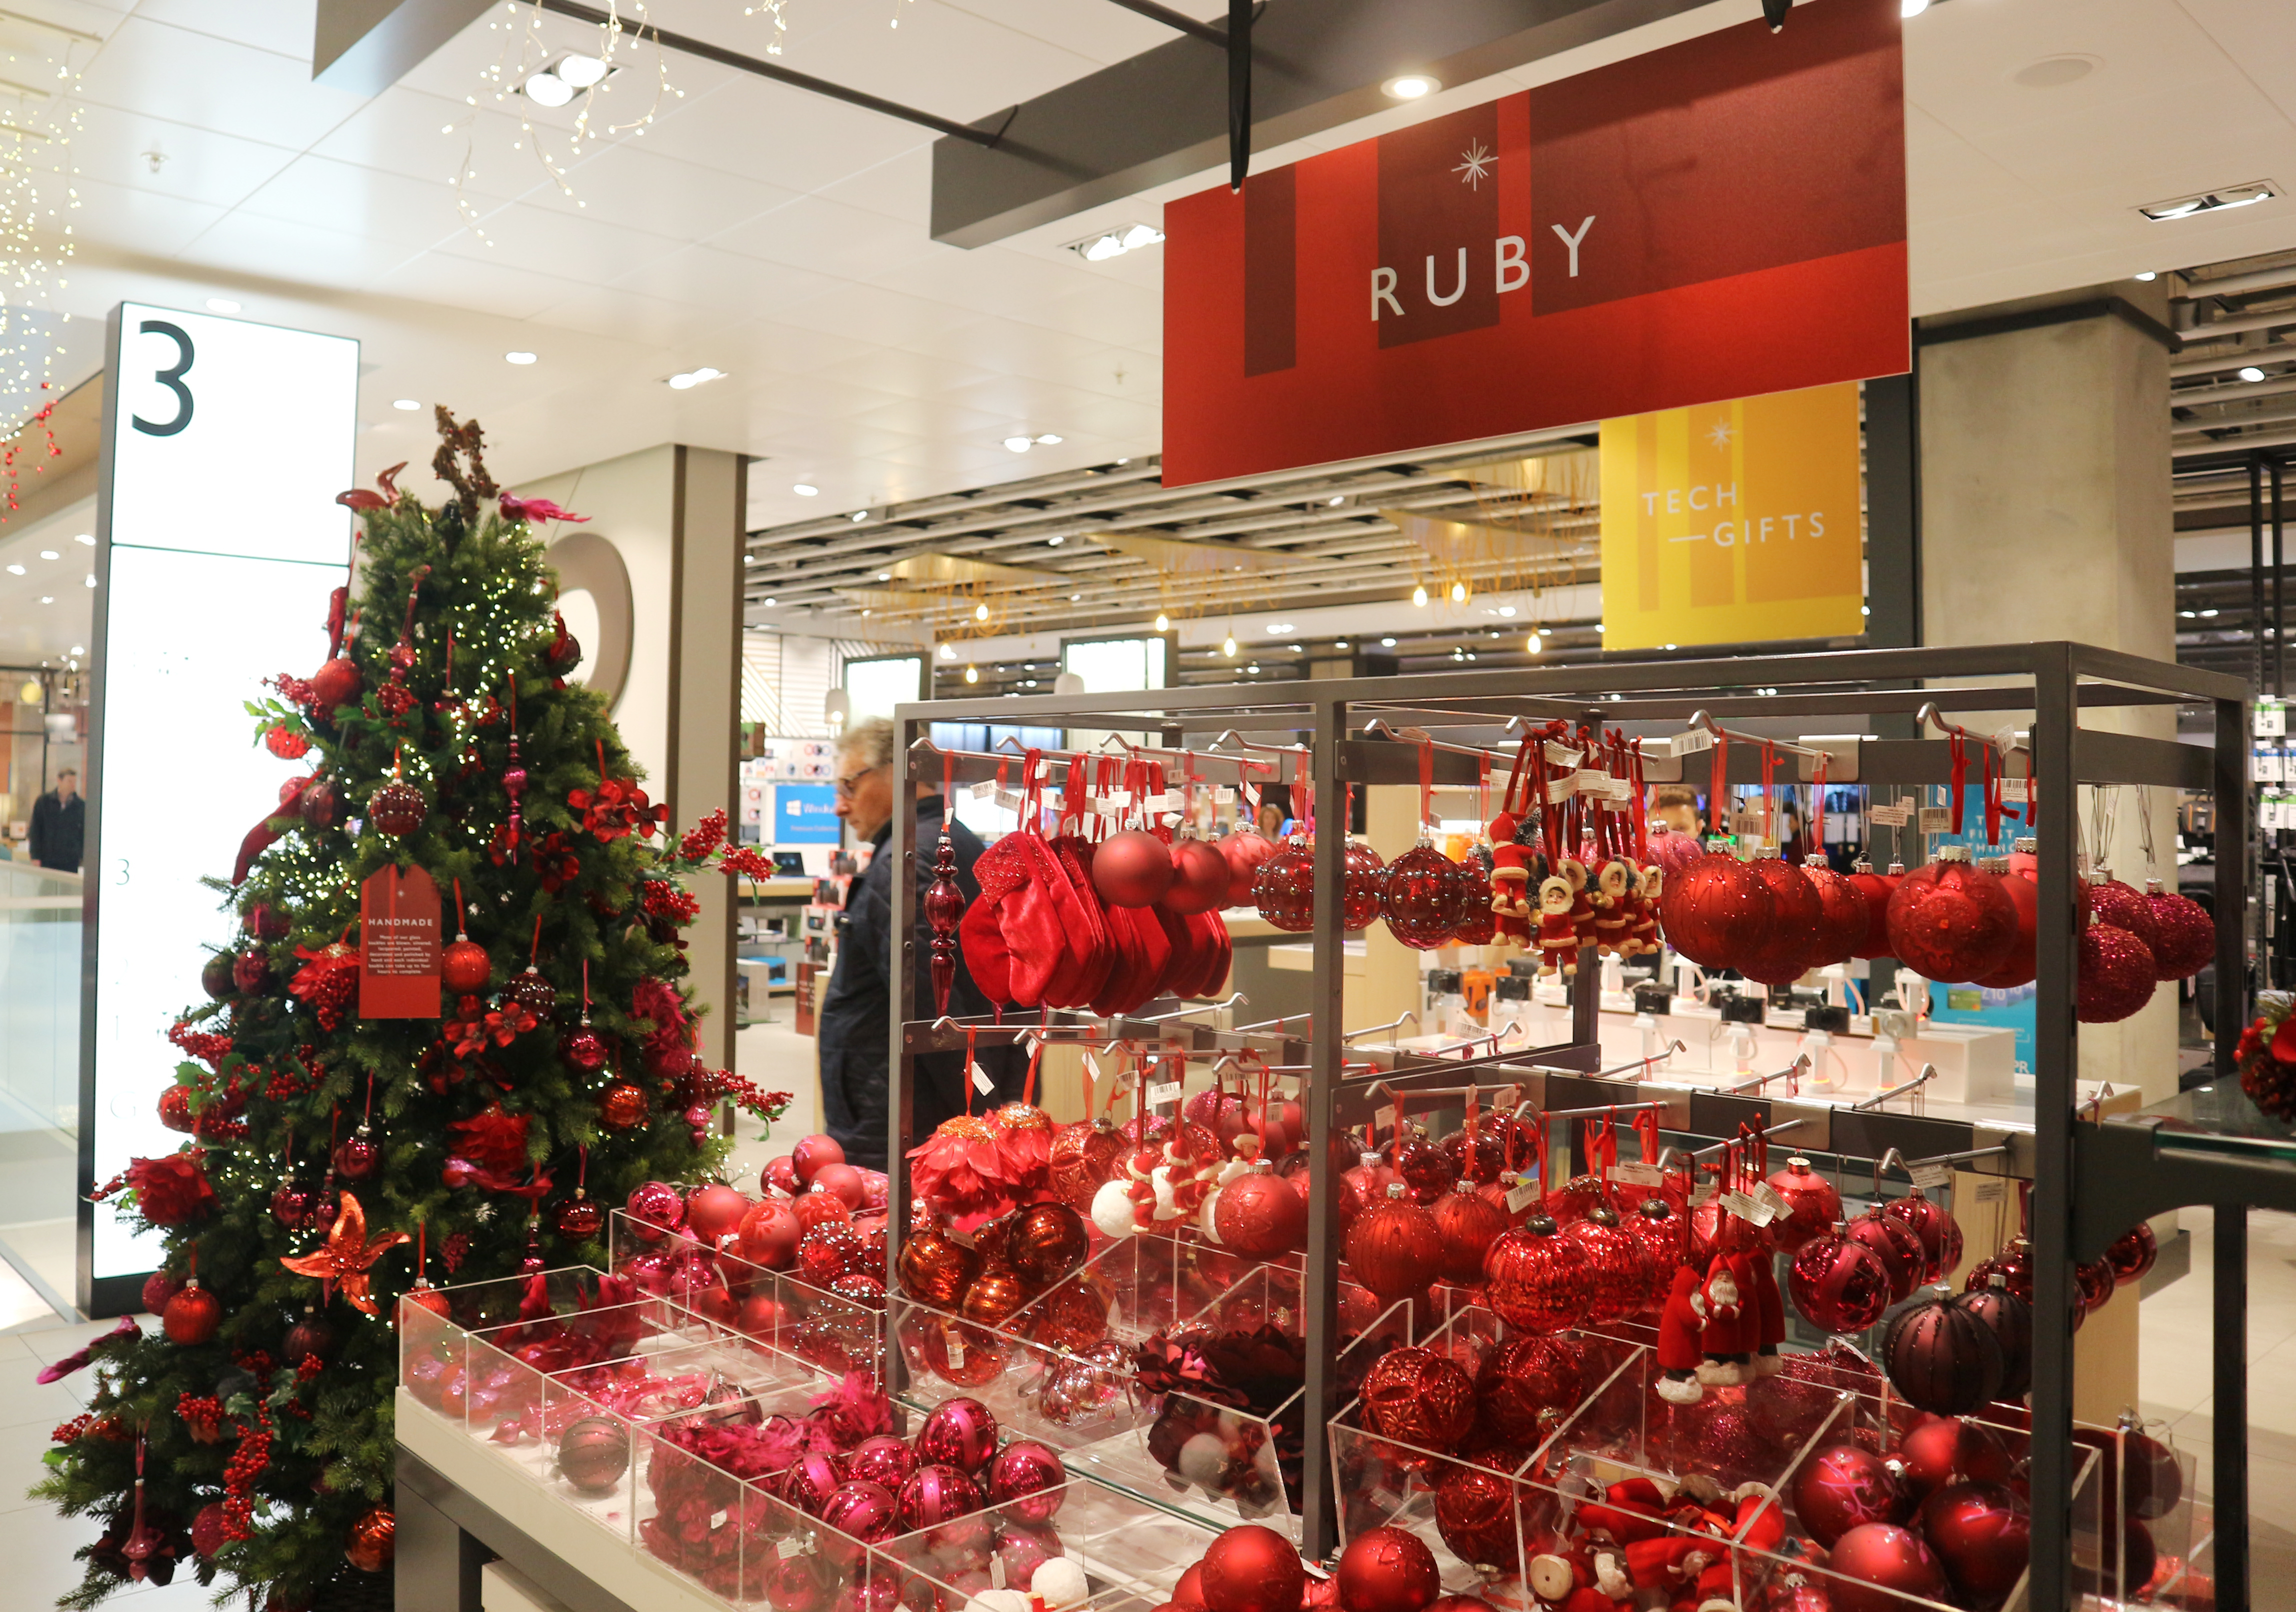 Christmas at John Lewis & Partners - The Ruby Collection